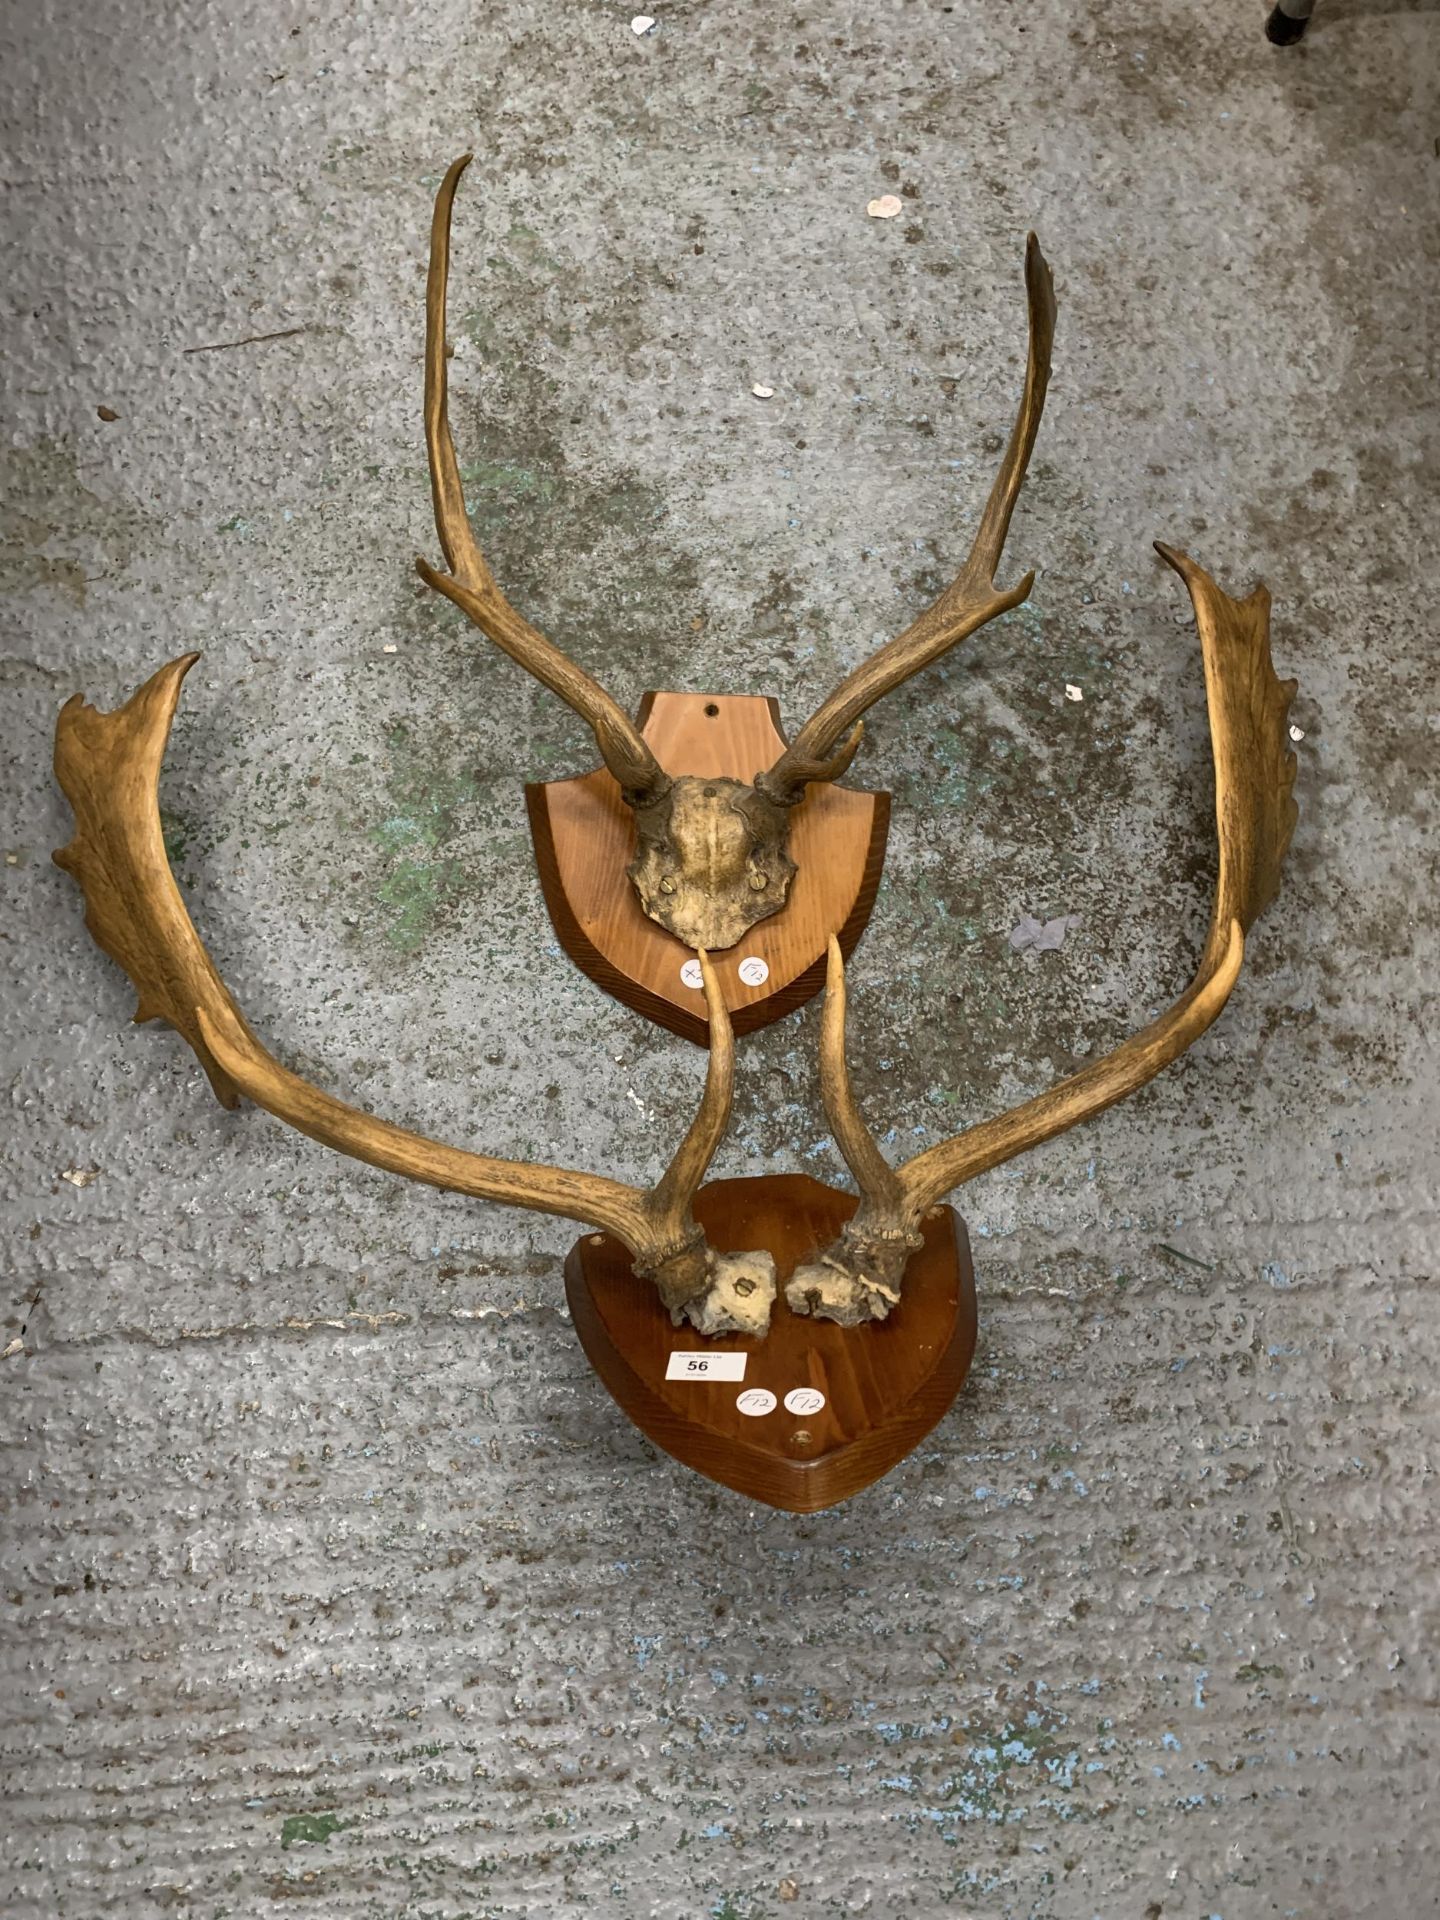 TWO SETS OF ANTLERS MOUNTED ON WOODEN SHEILDS